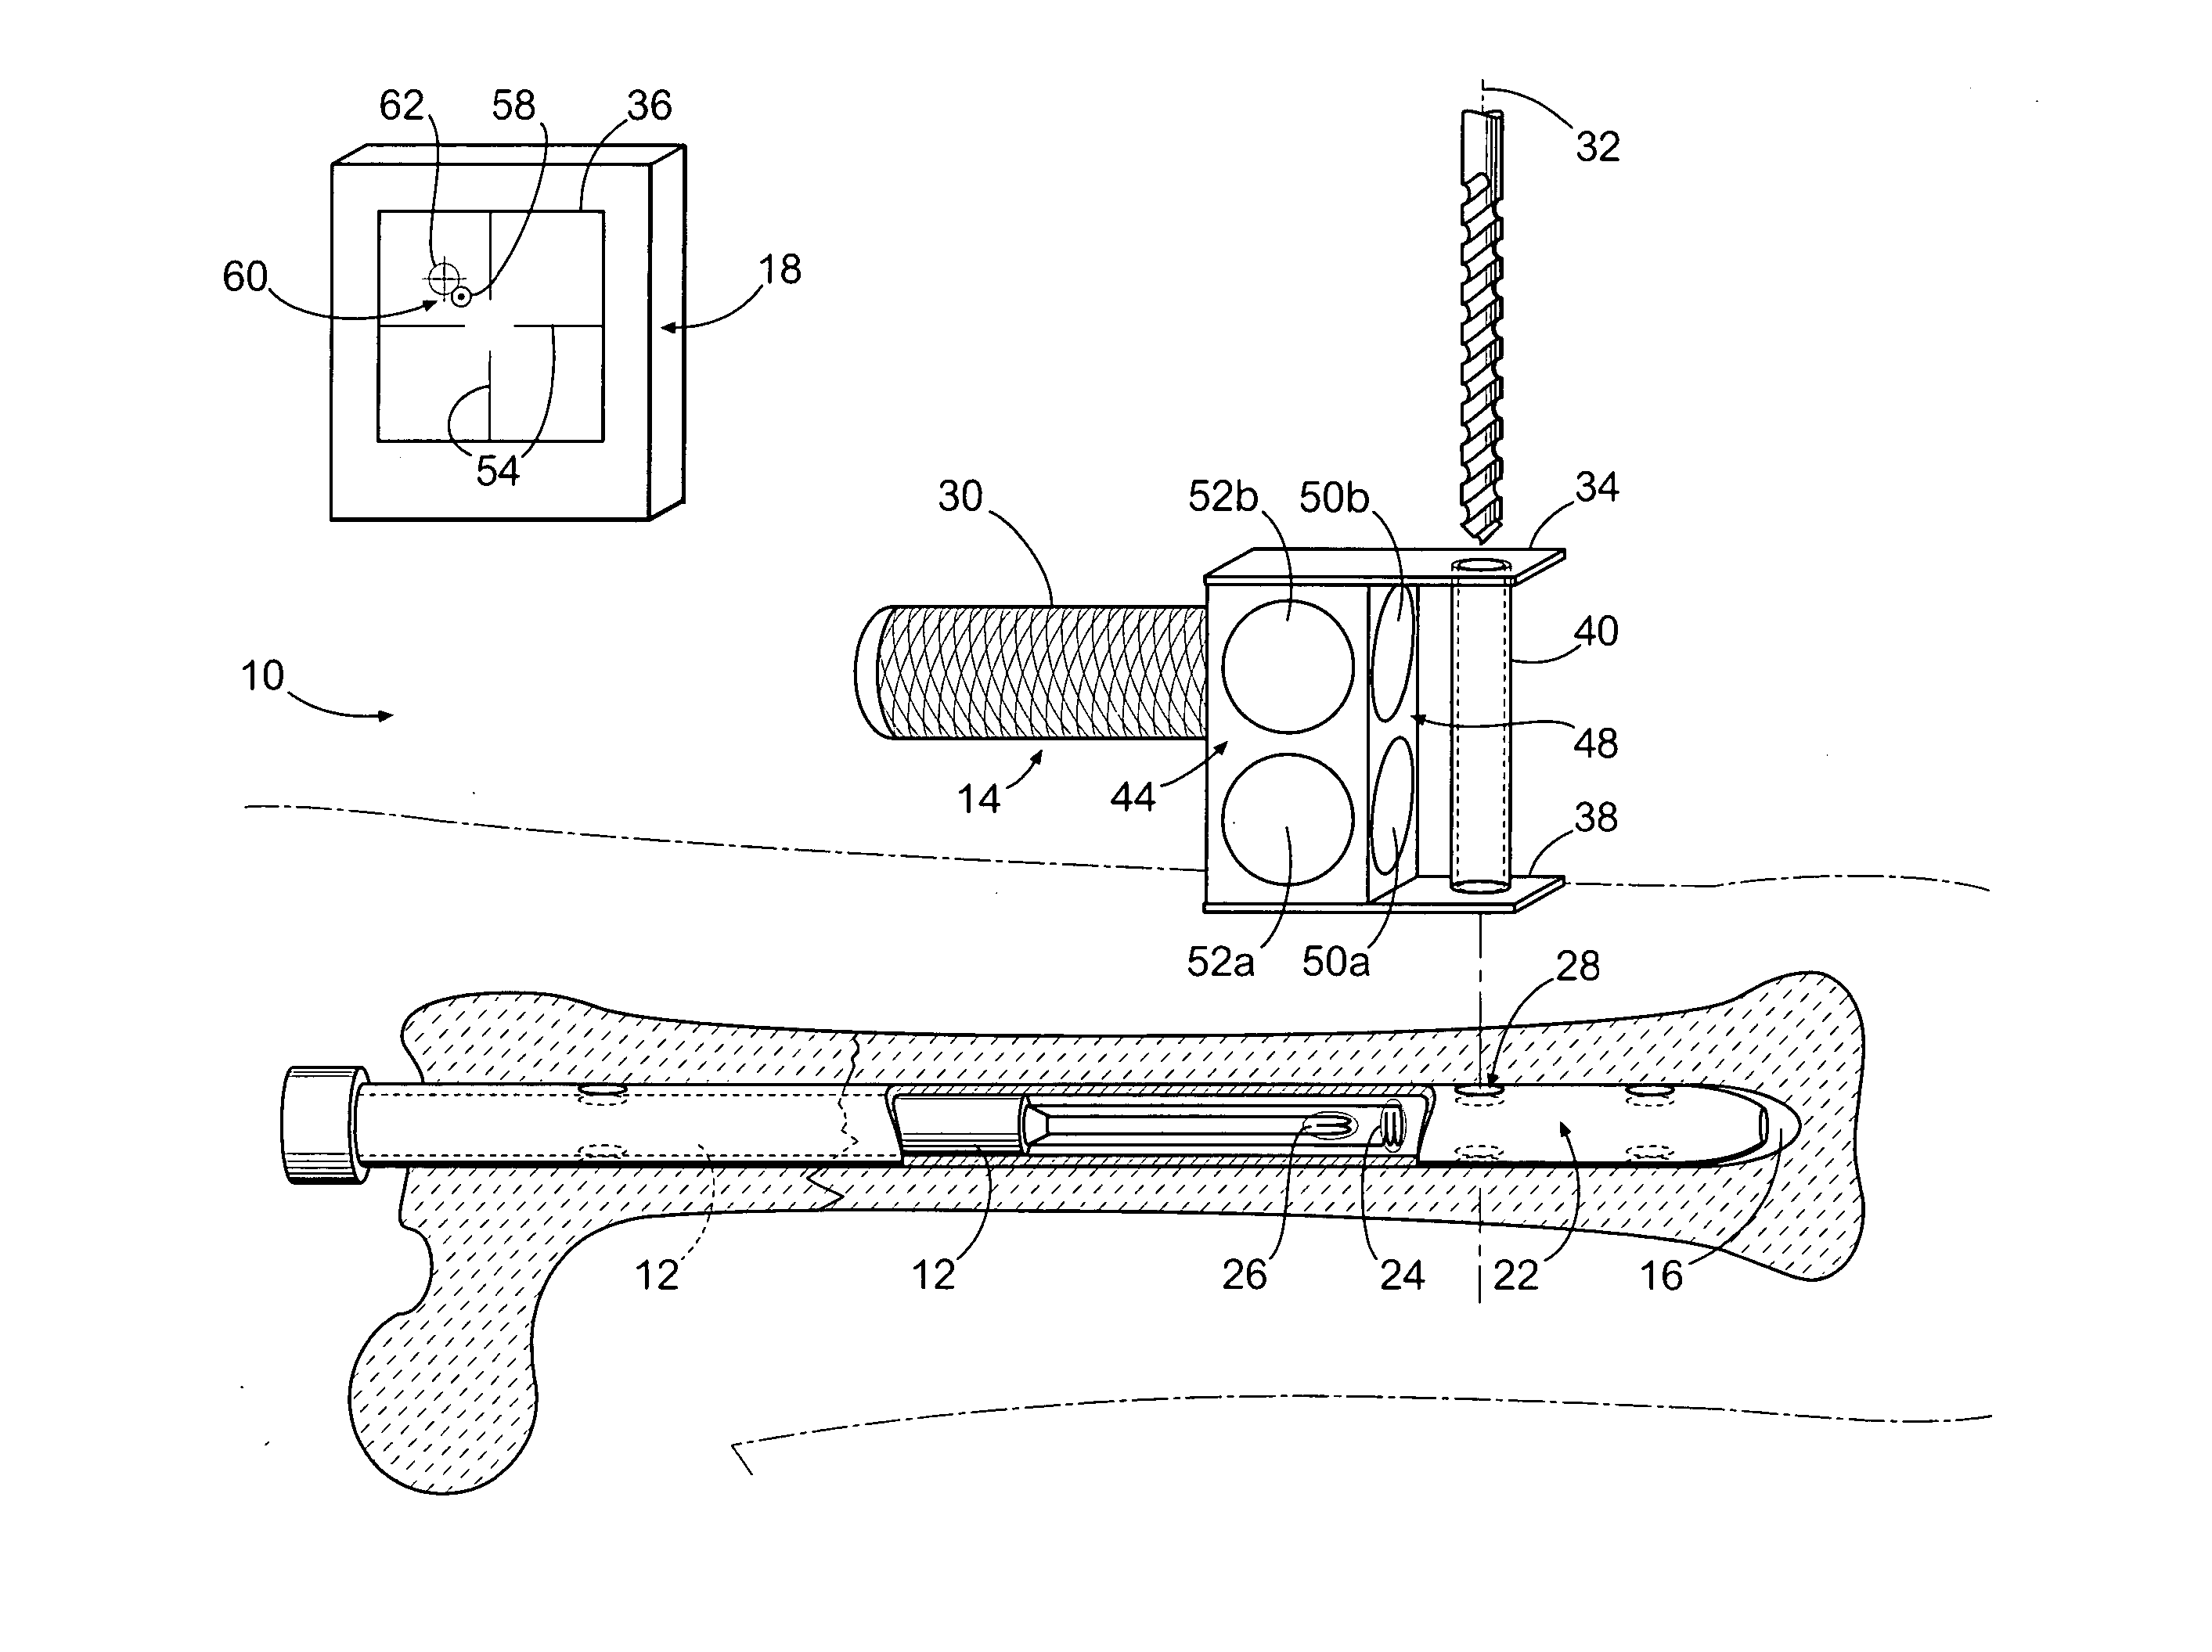 Method and apparatus for distal targeting of locking screws in intramedullary nails